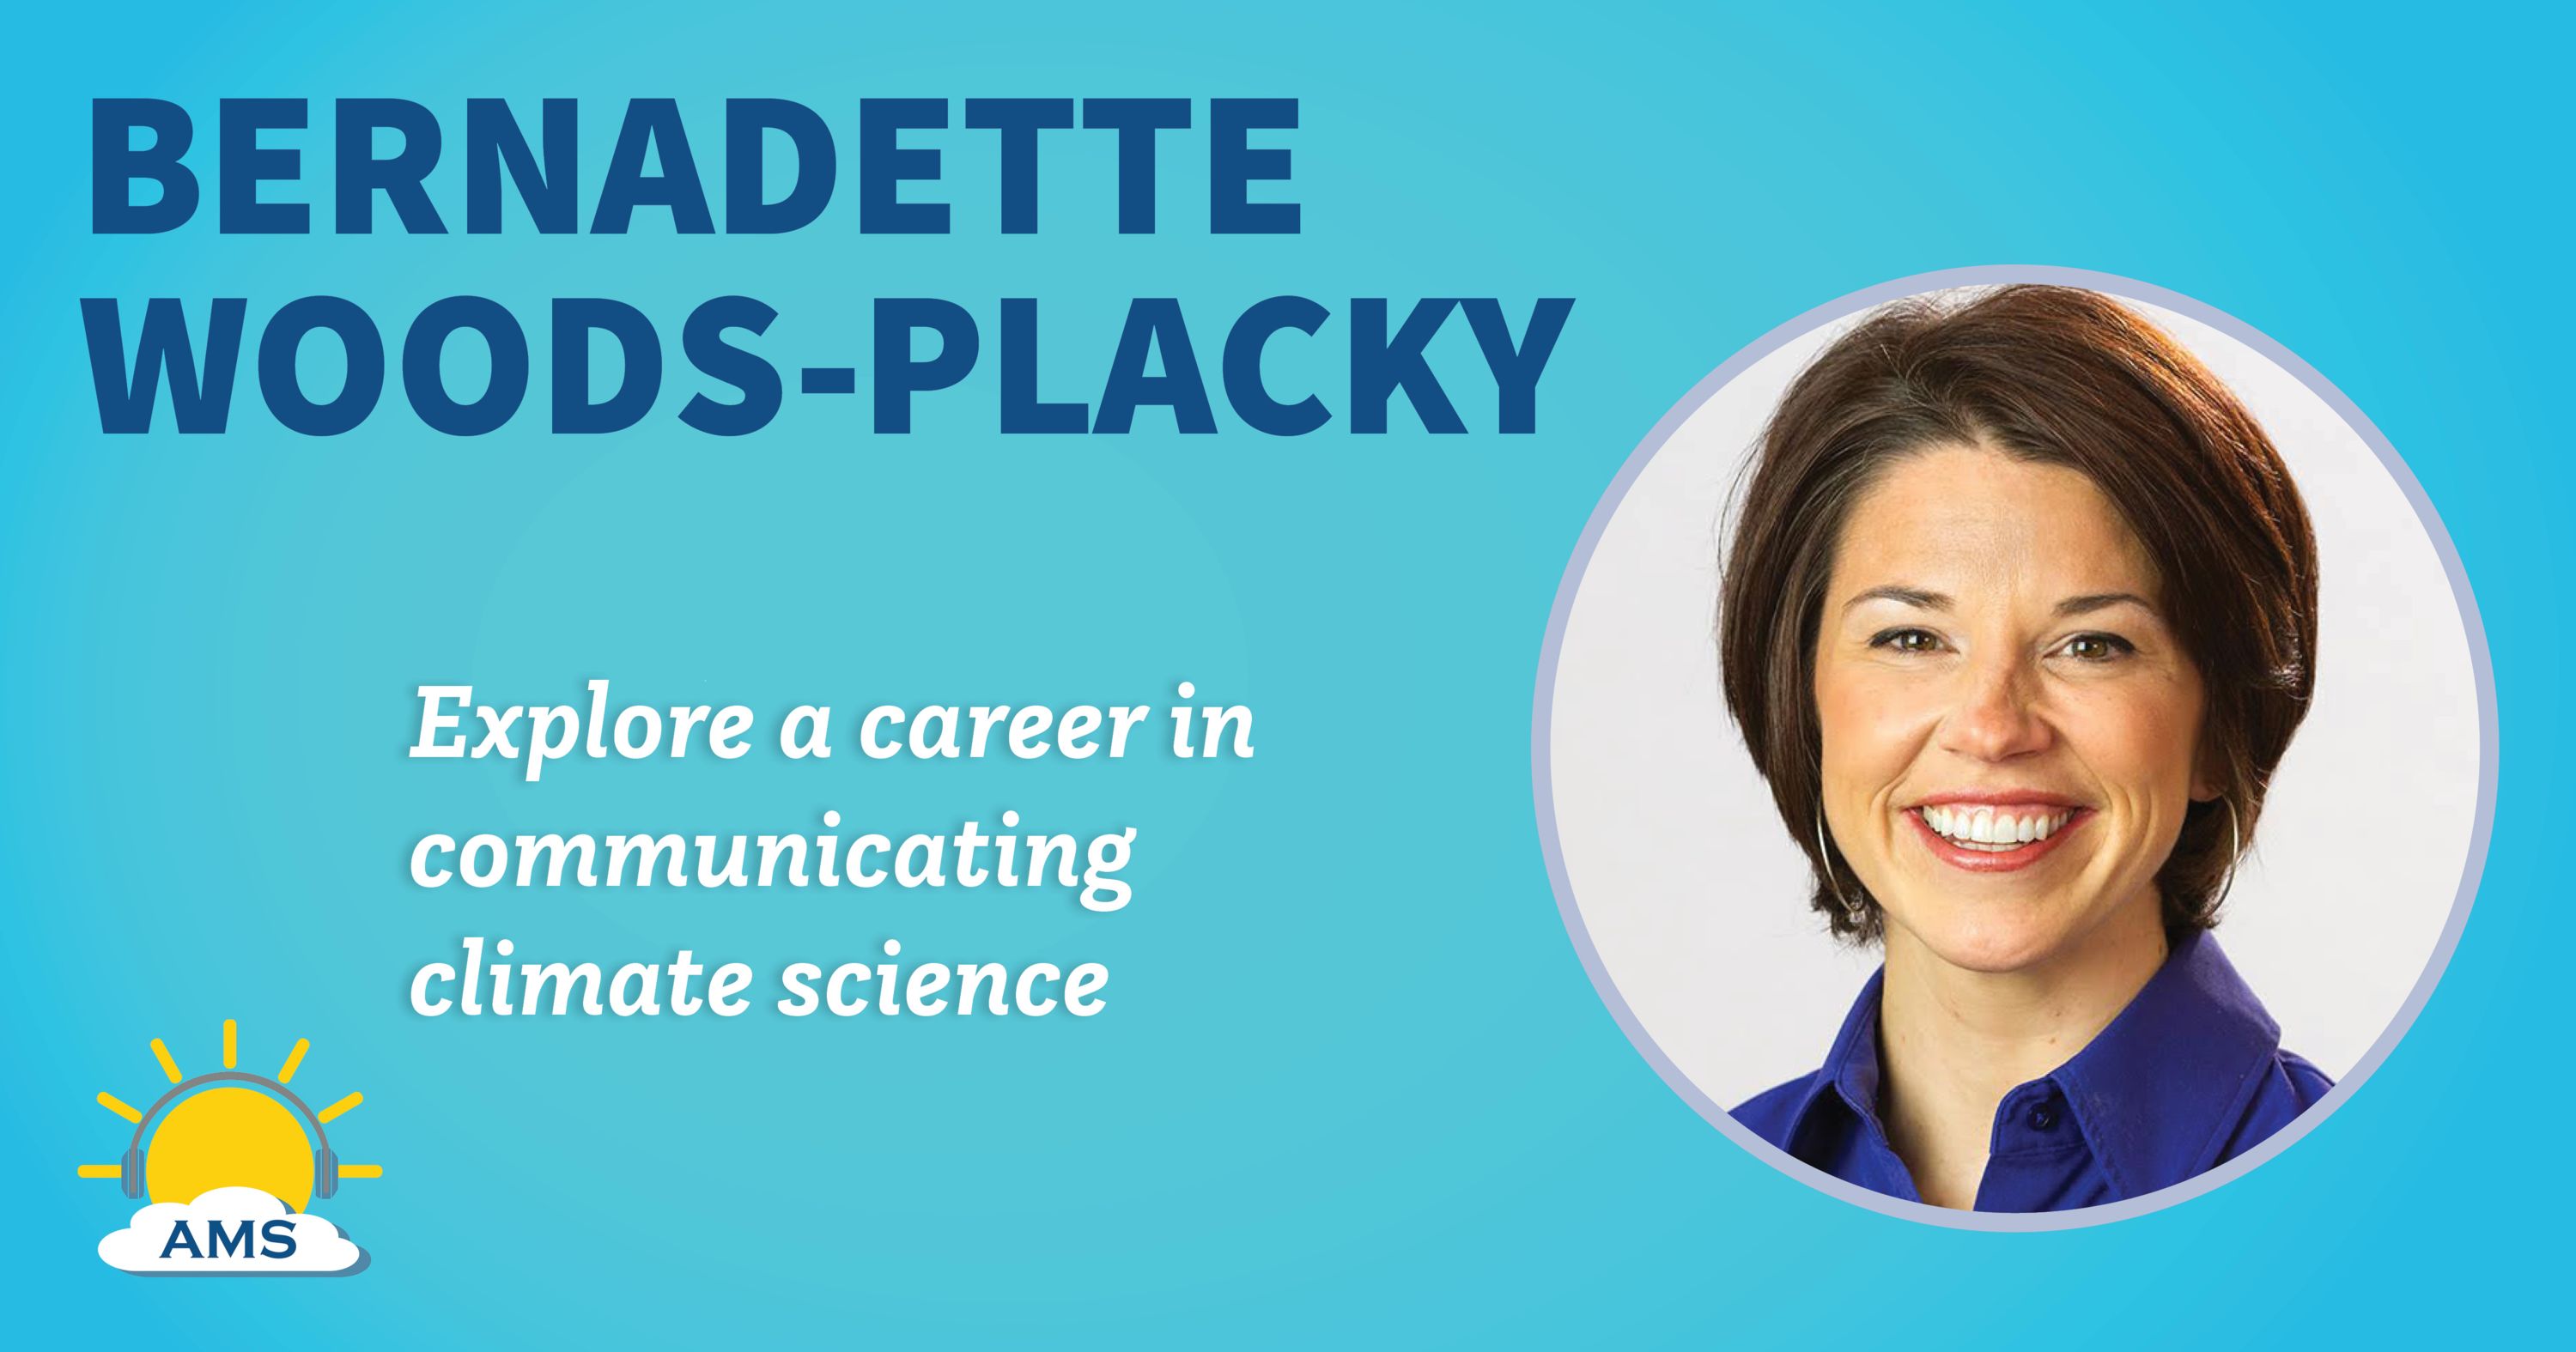 bernadette woods placky headshot graphic with teaser text that reads &quotexplore a career in communicating climate science"